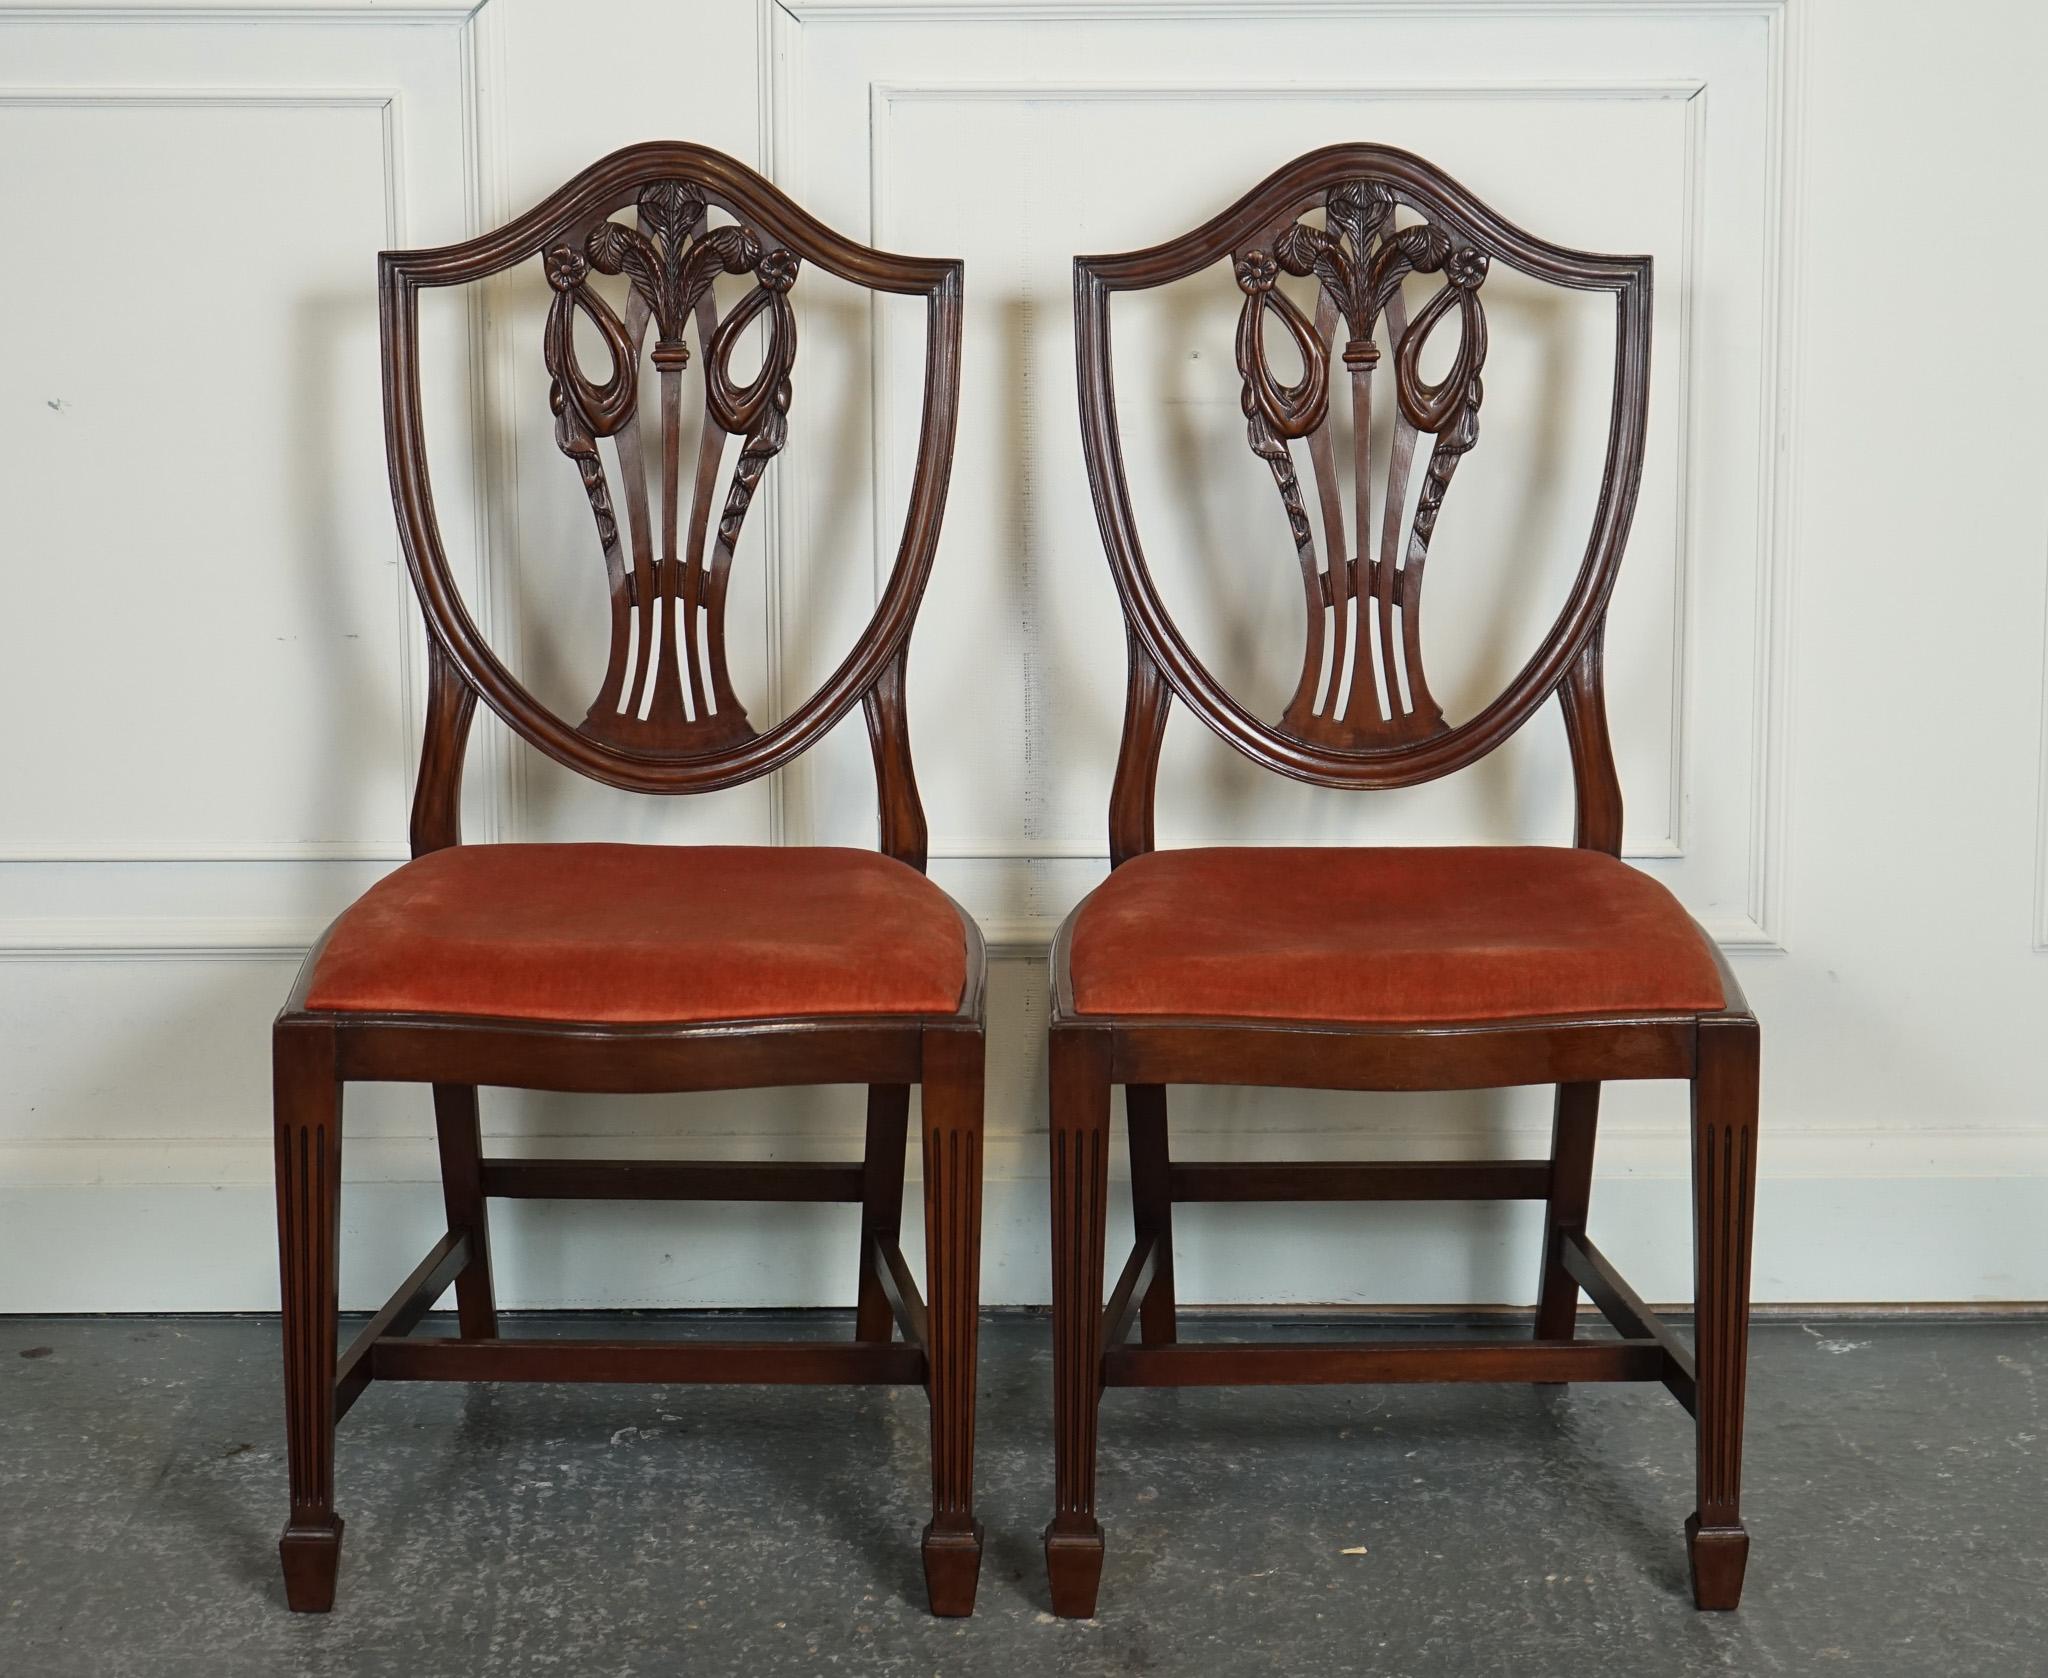 Antiques of London

We are delighted to offer for sale this Lovely Pair Of Victorian Hepplewhite Hallway Side Chairs.

These Victorian Hepplewhite hallway side chairs are truly lovely and exude an air of elegance and sophistication. Crafted during